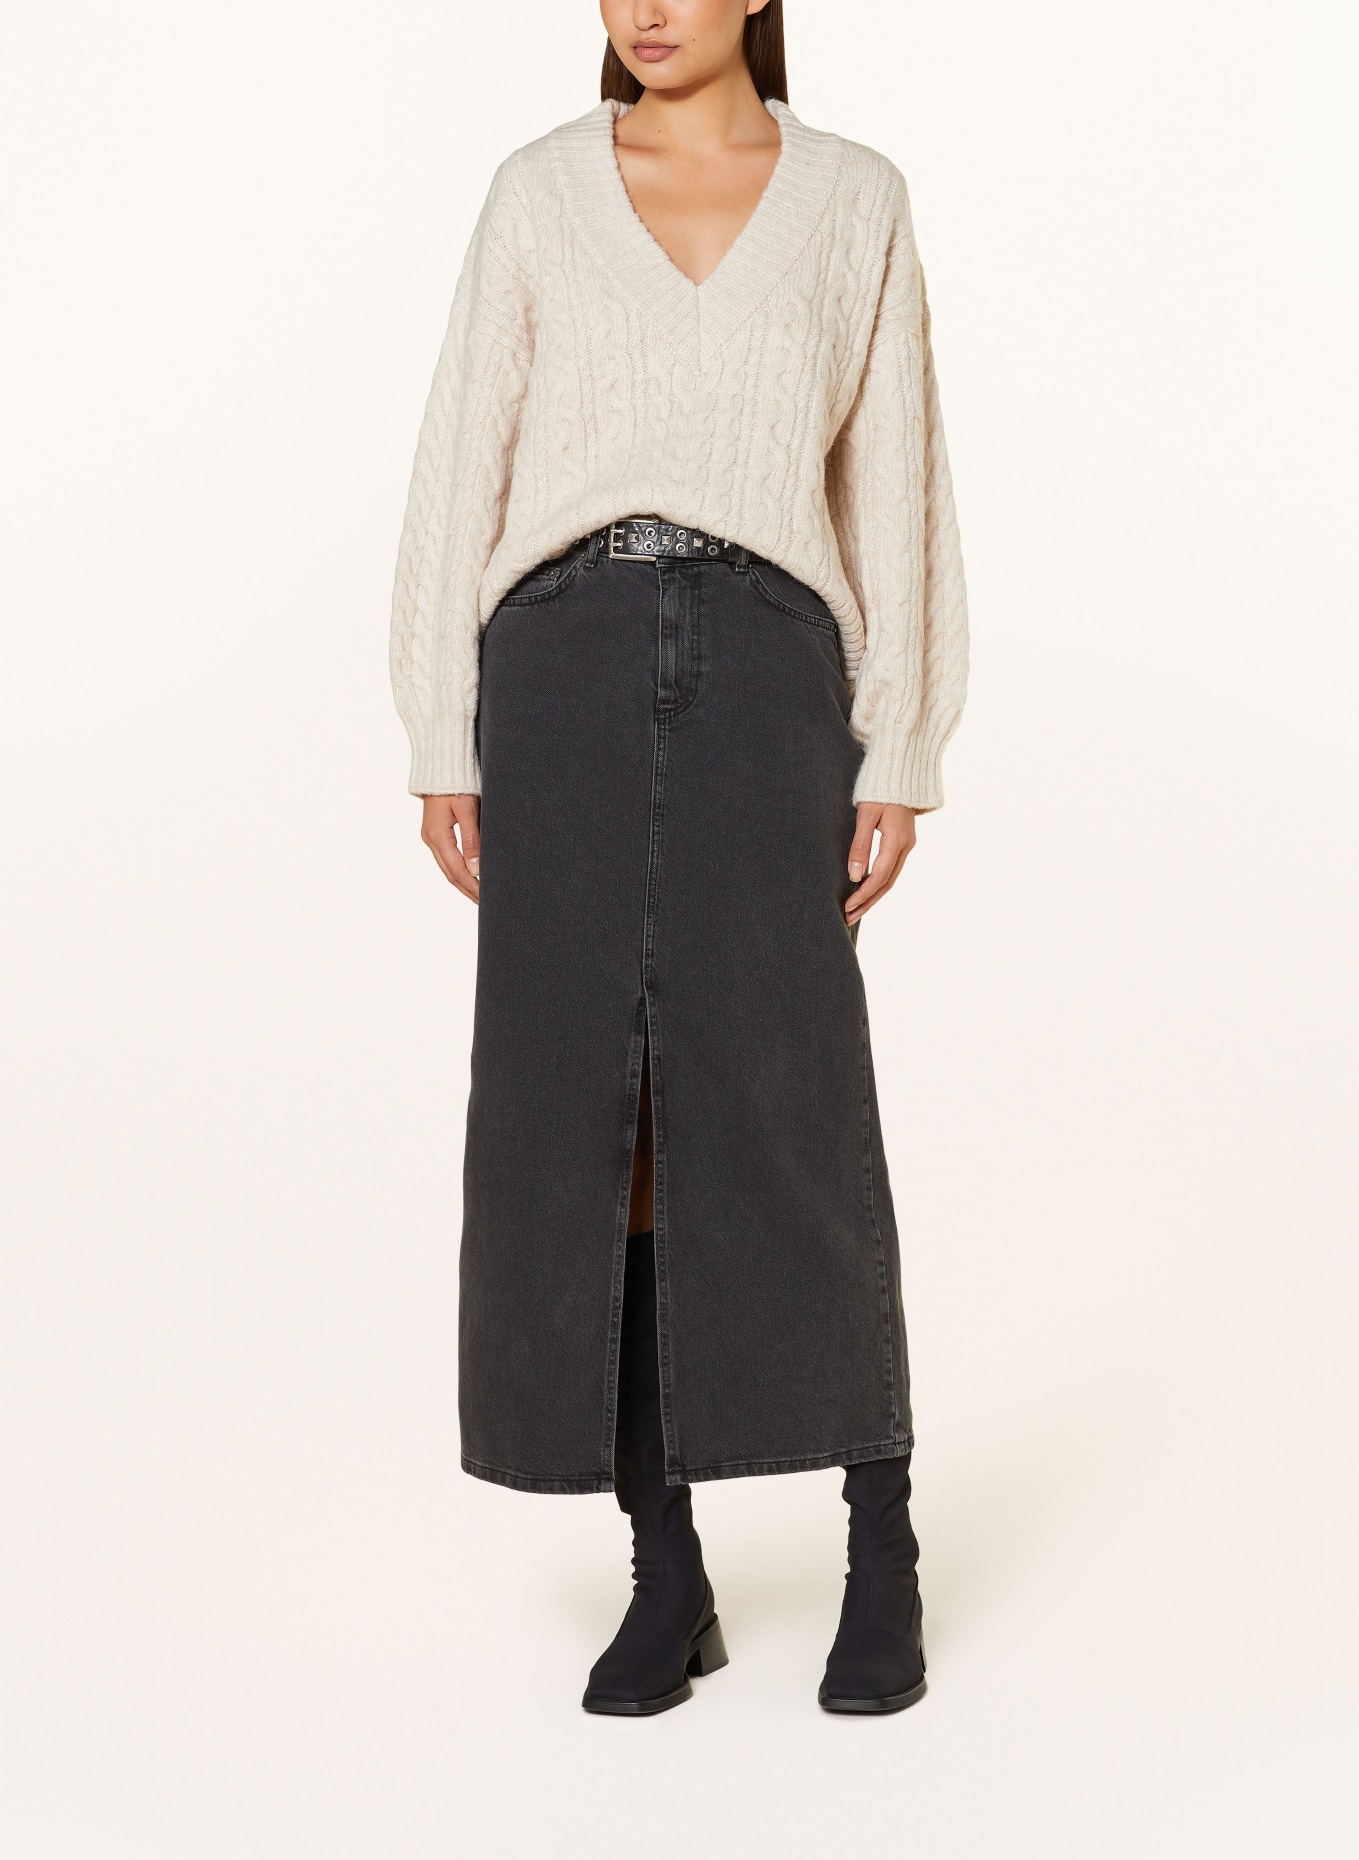 gina tricot Oversized sweater, Color: BEIGE (Image 2)